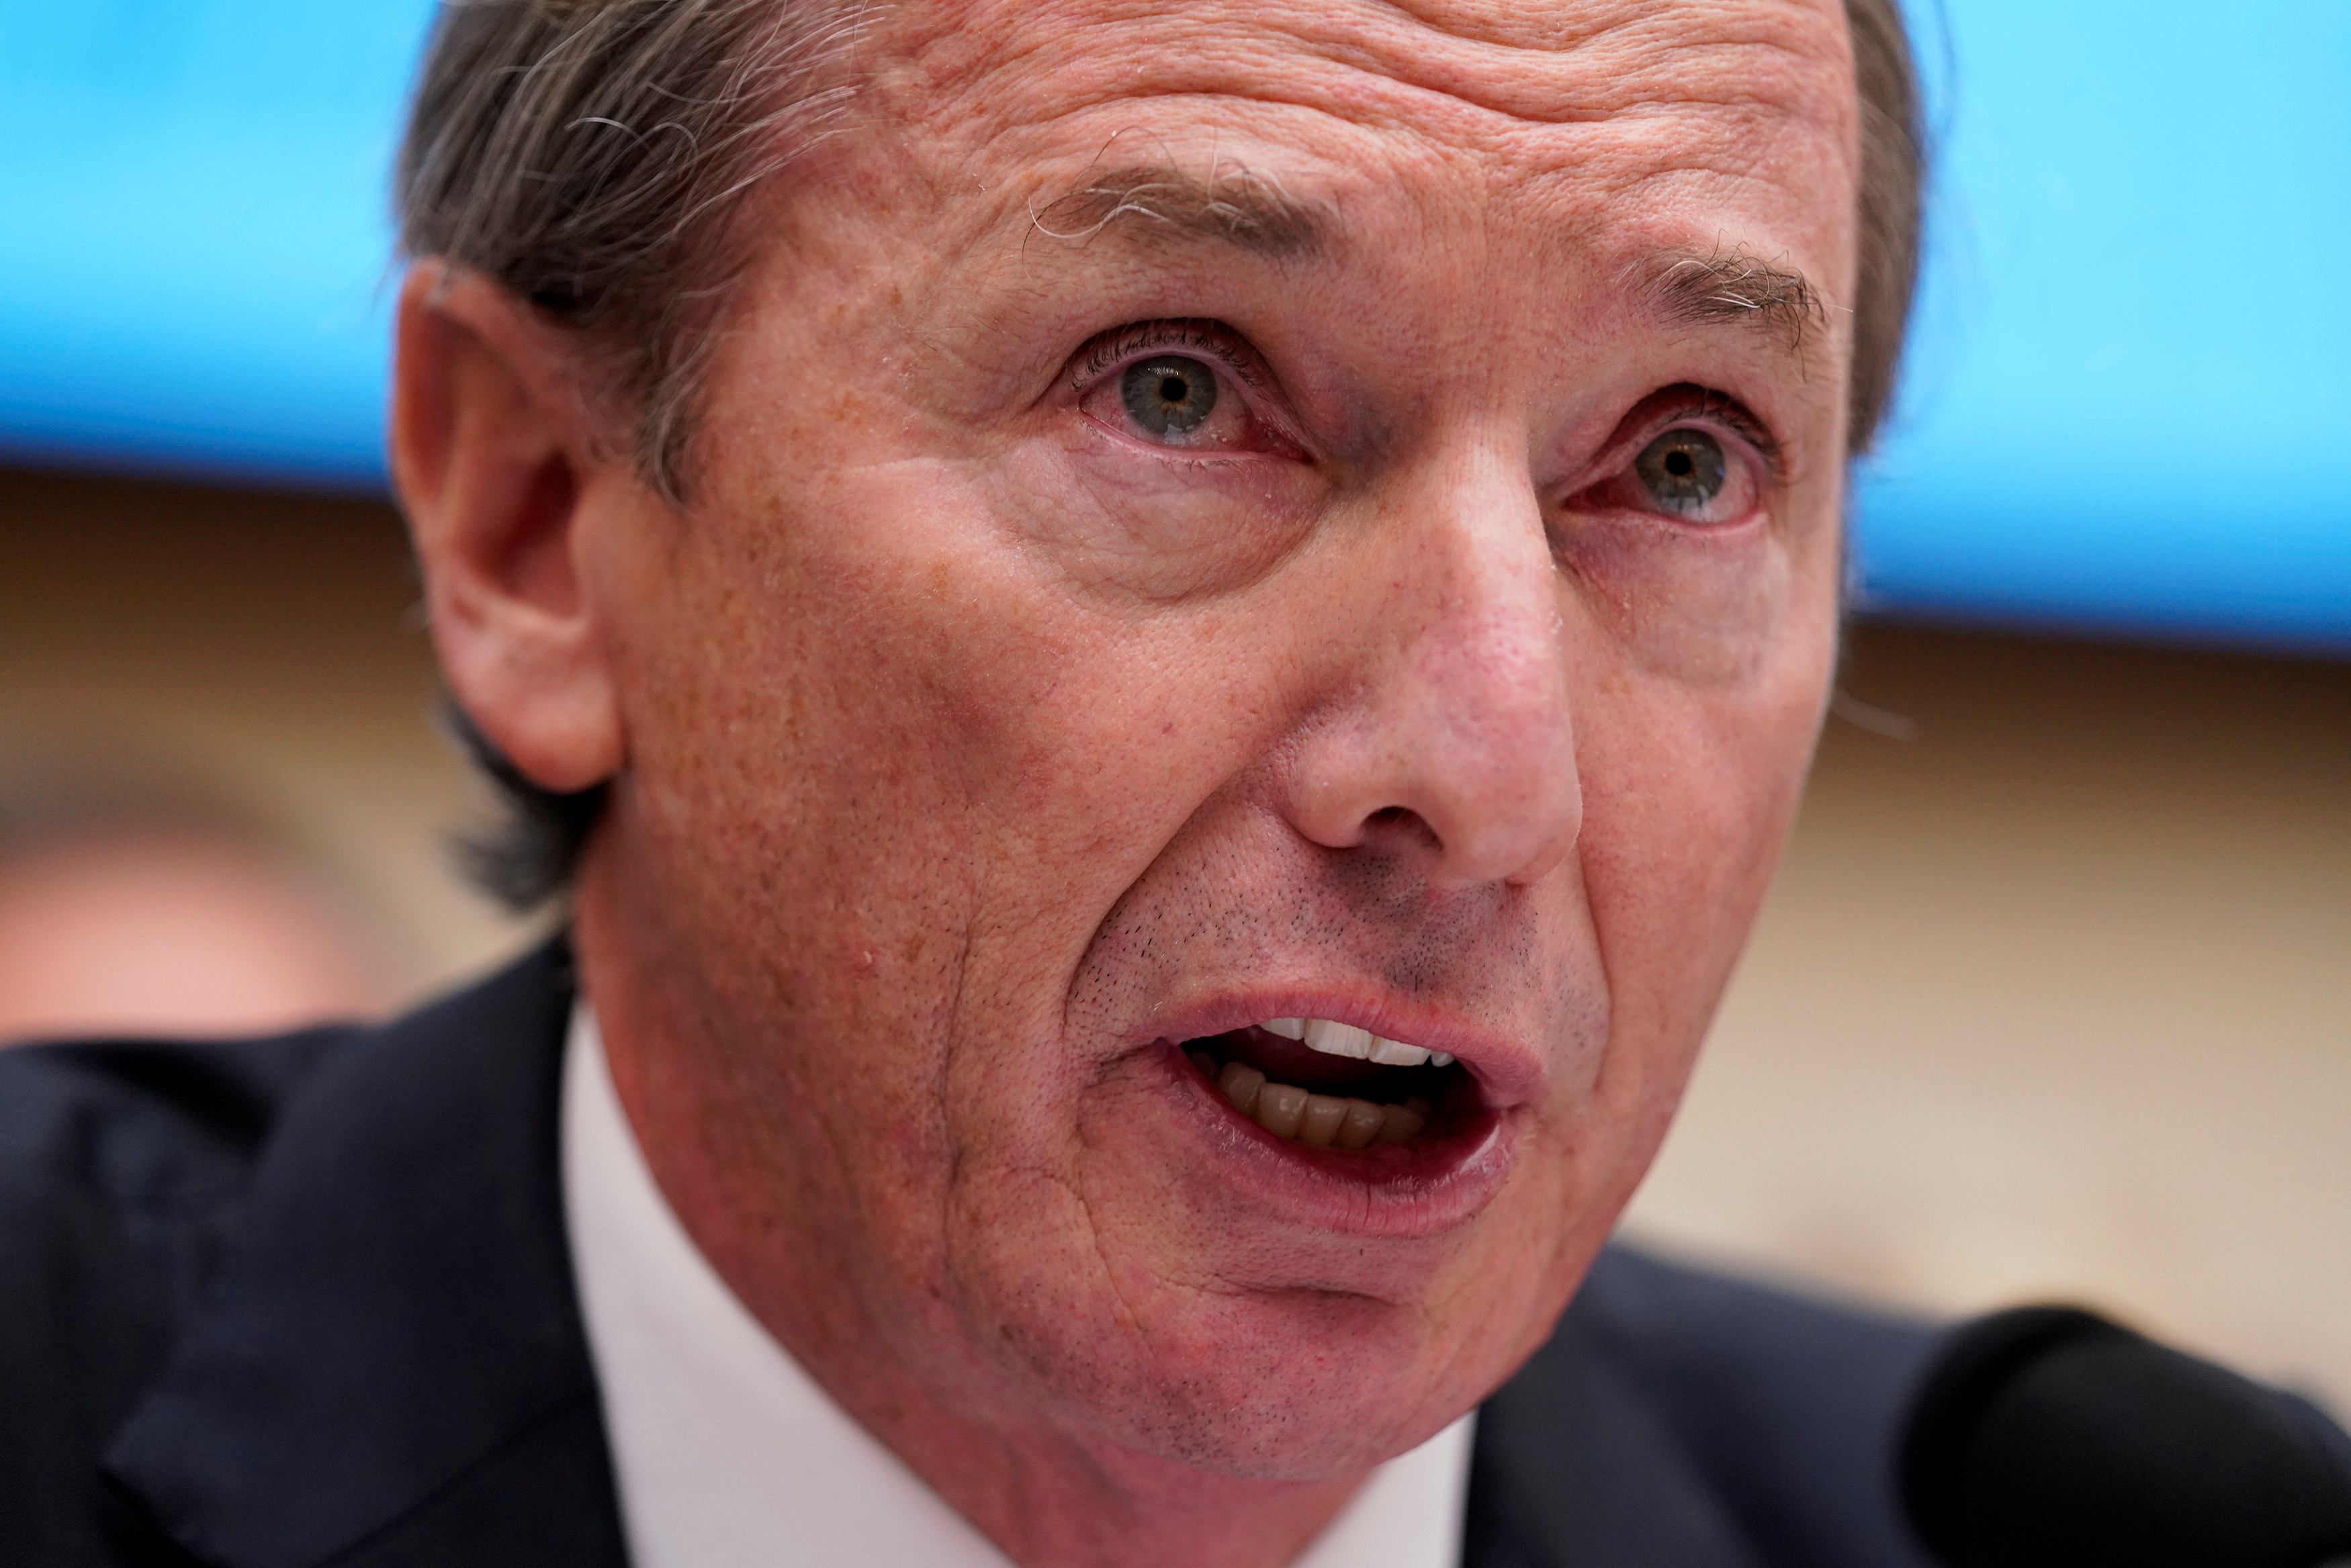 James P. Gorman, chairman & CEO of Morgan Stanley, testifies before a House Financial Services Committee hearing on "Holding Megabanks Accountable: A Review of Global Systemically Important Banks 10 Years After the Financial Crisis" on Capitol Hill in Washington, U.S., April 10, 2019. REUTERS/Aaron P. Bernstein